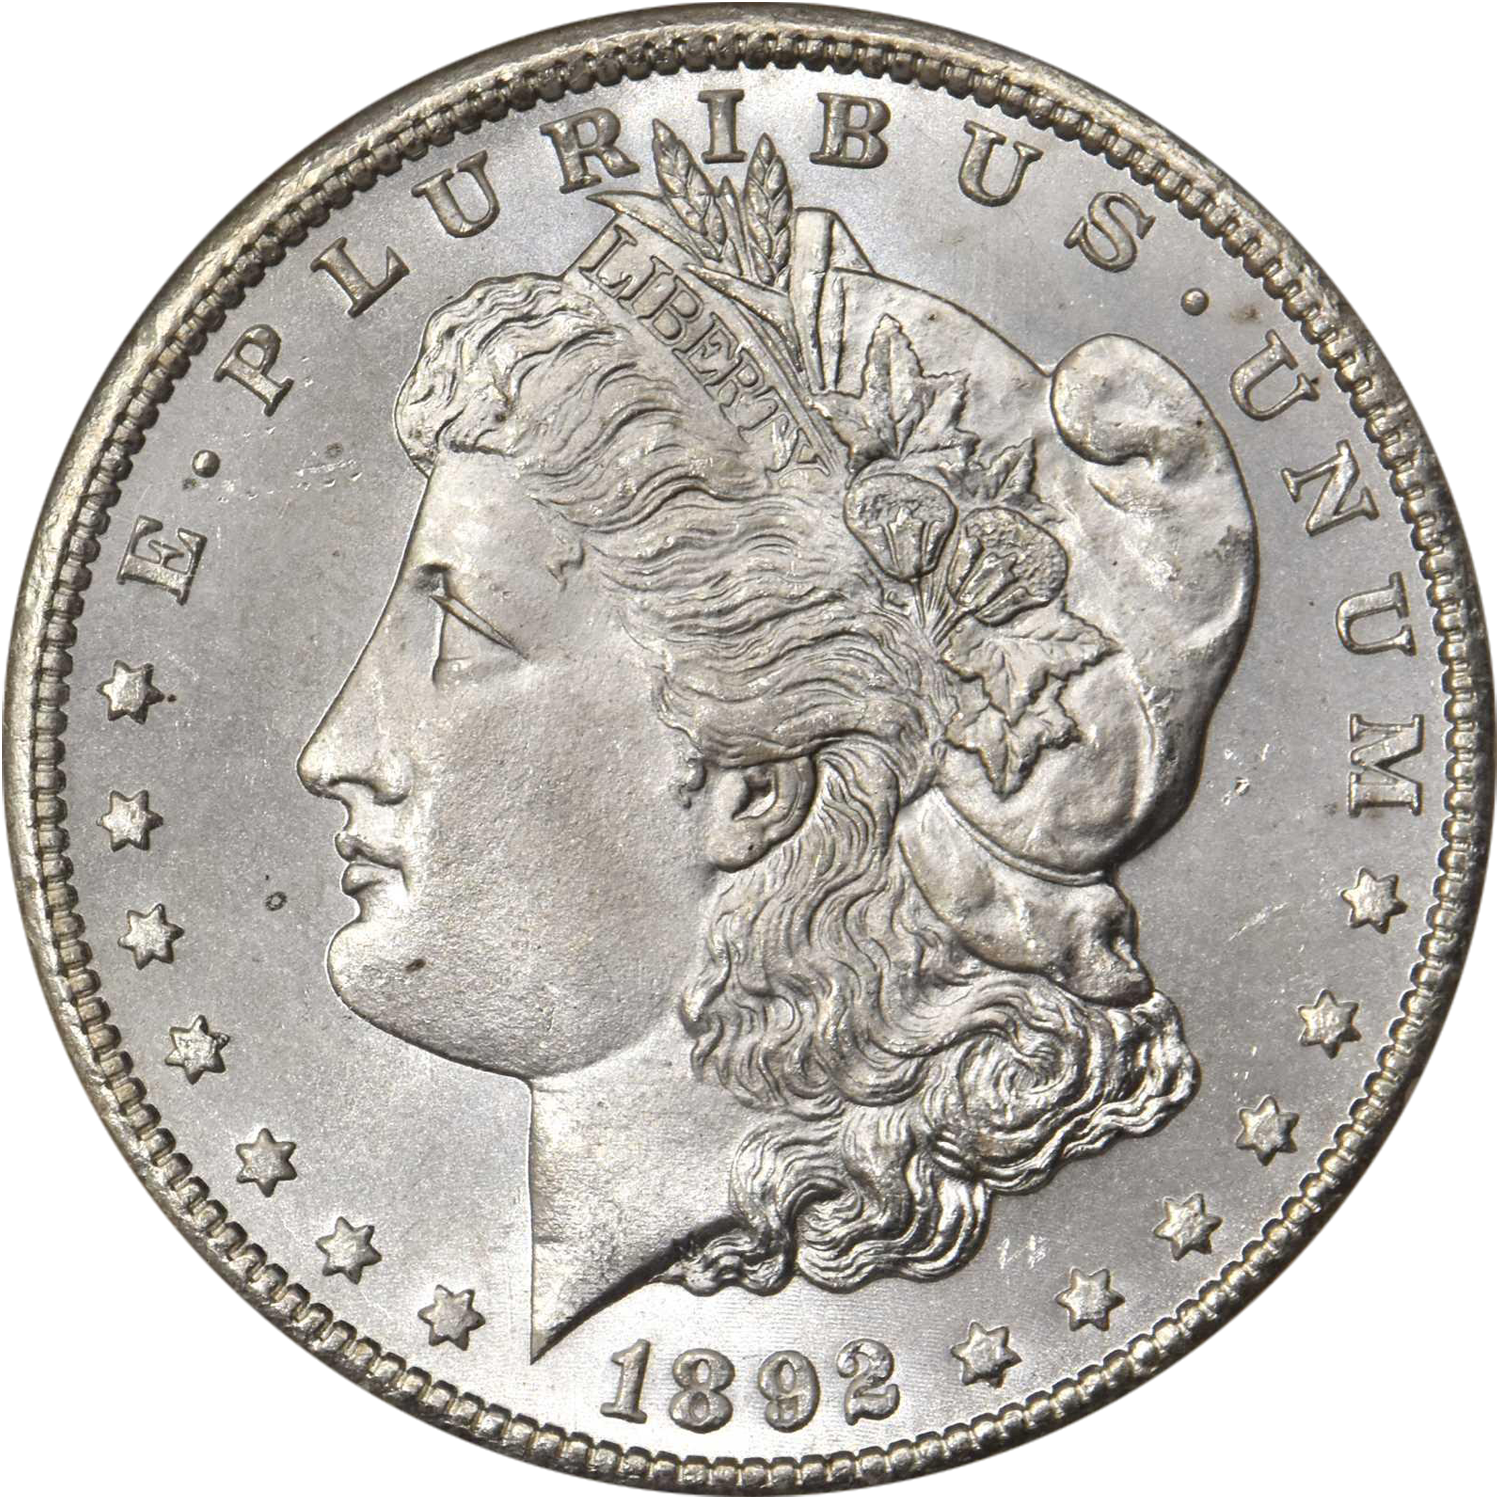 1892 cc mint state morgan dollar value guide